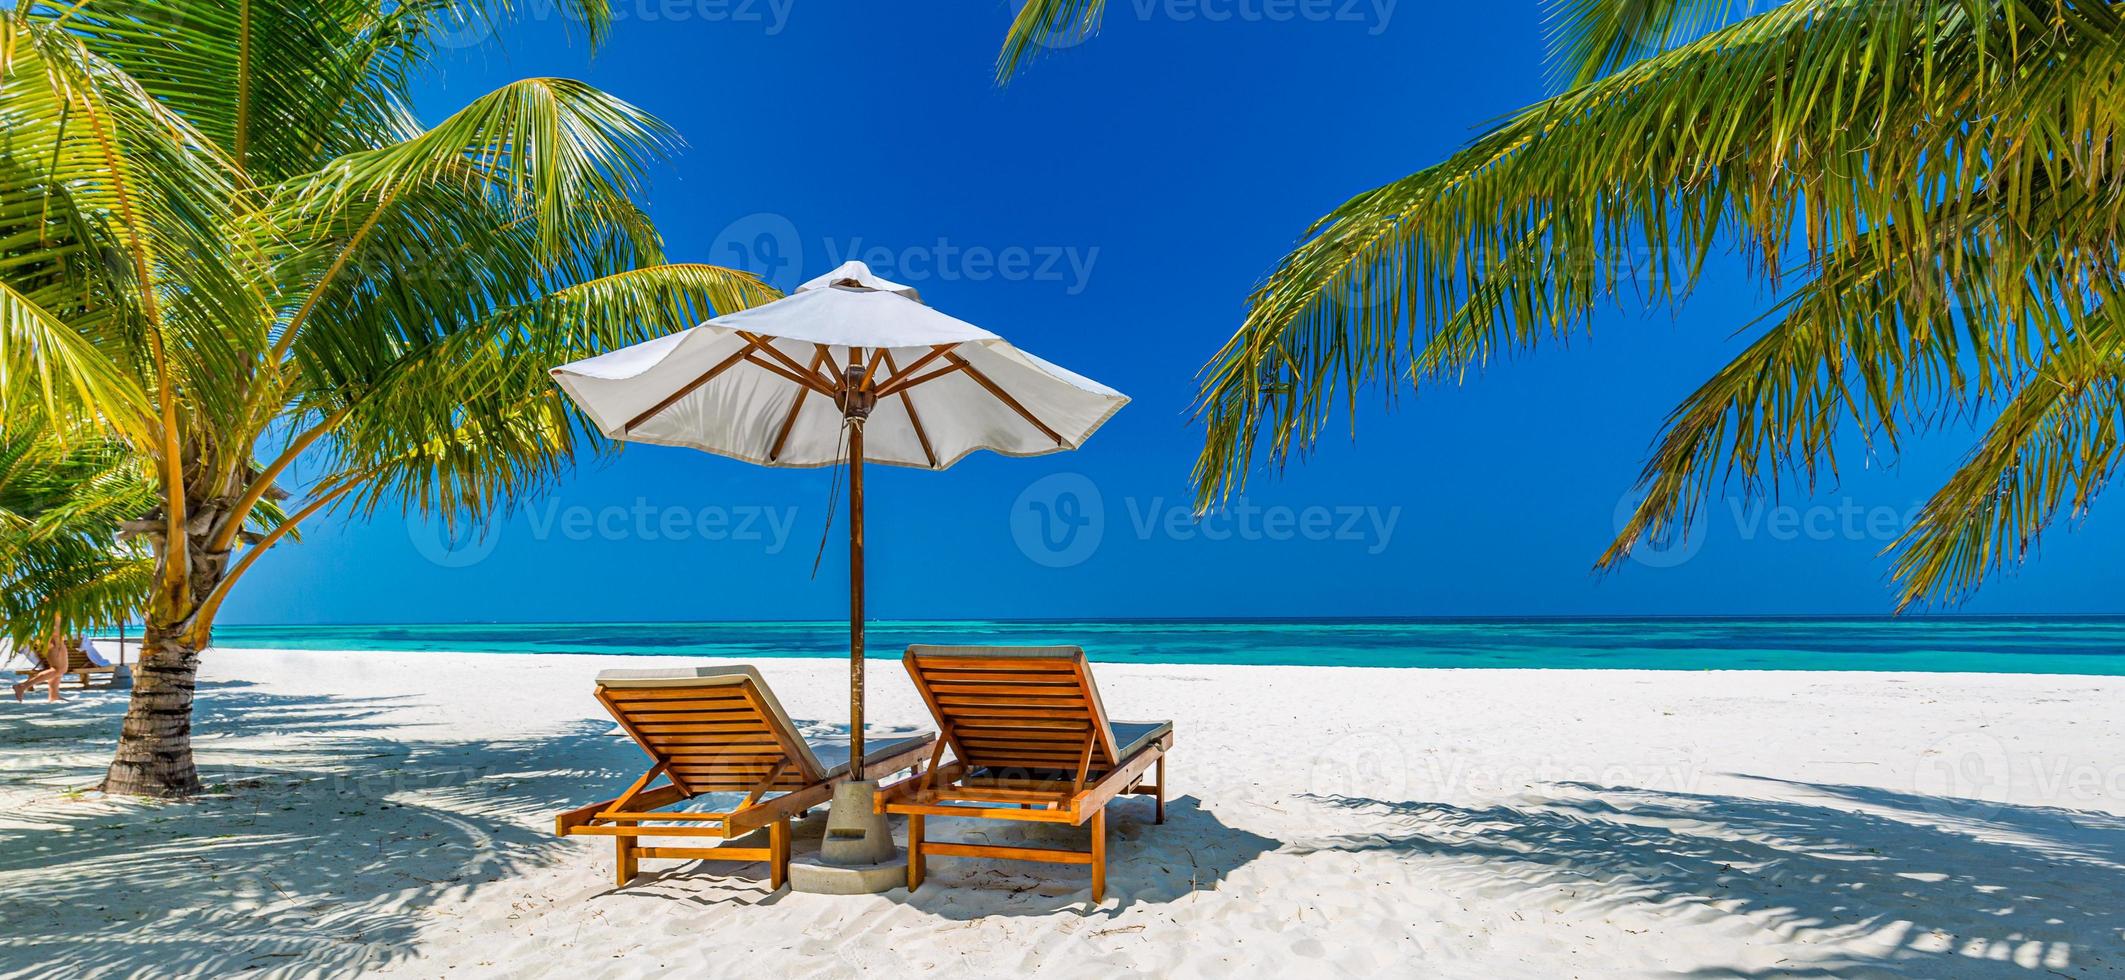 Beautiful tropical beach banner. White sand and coco palms travel tourism wide panorama background concept. Amazing beach landscape. Boost up color process. Luxury island resort vacation or holiday photo